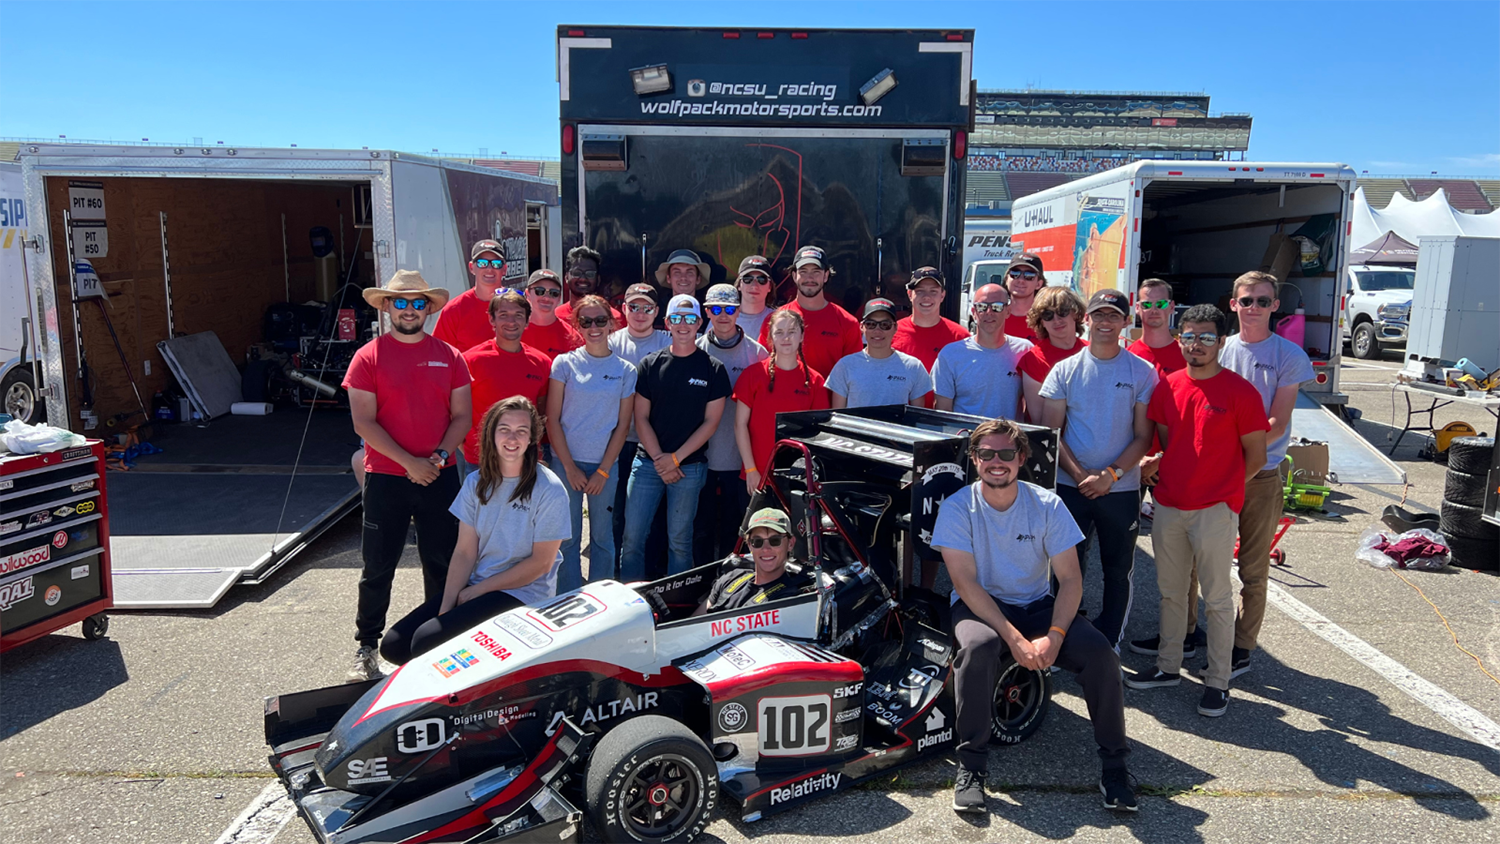 NC State College of Engineering Formula SAE team poses for a group picture around their race car.